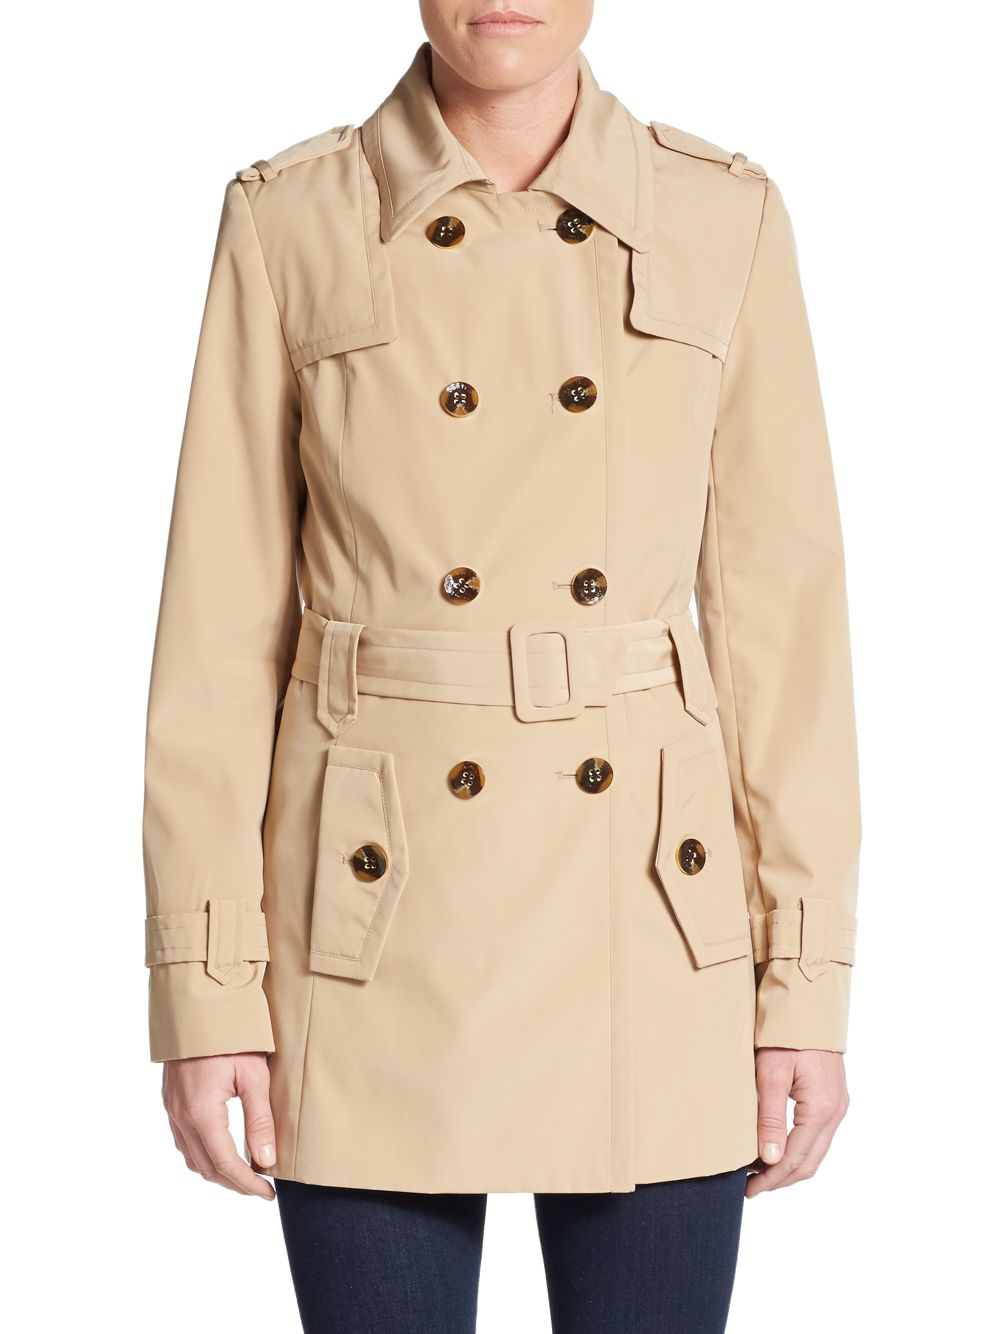 Lyst - Calvin klein Storm Flap Trench Coat in Natural